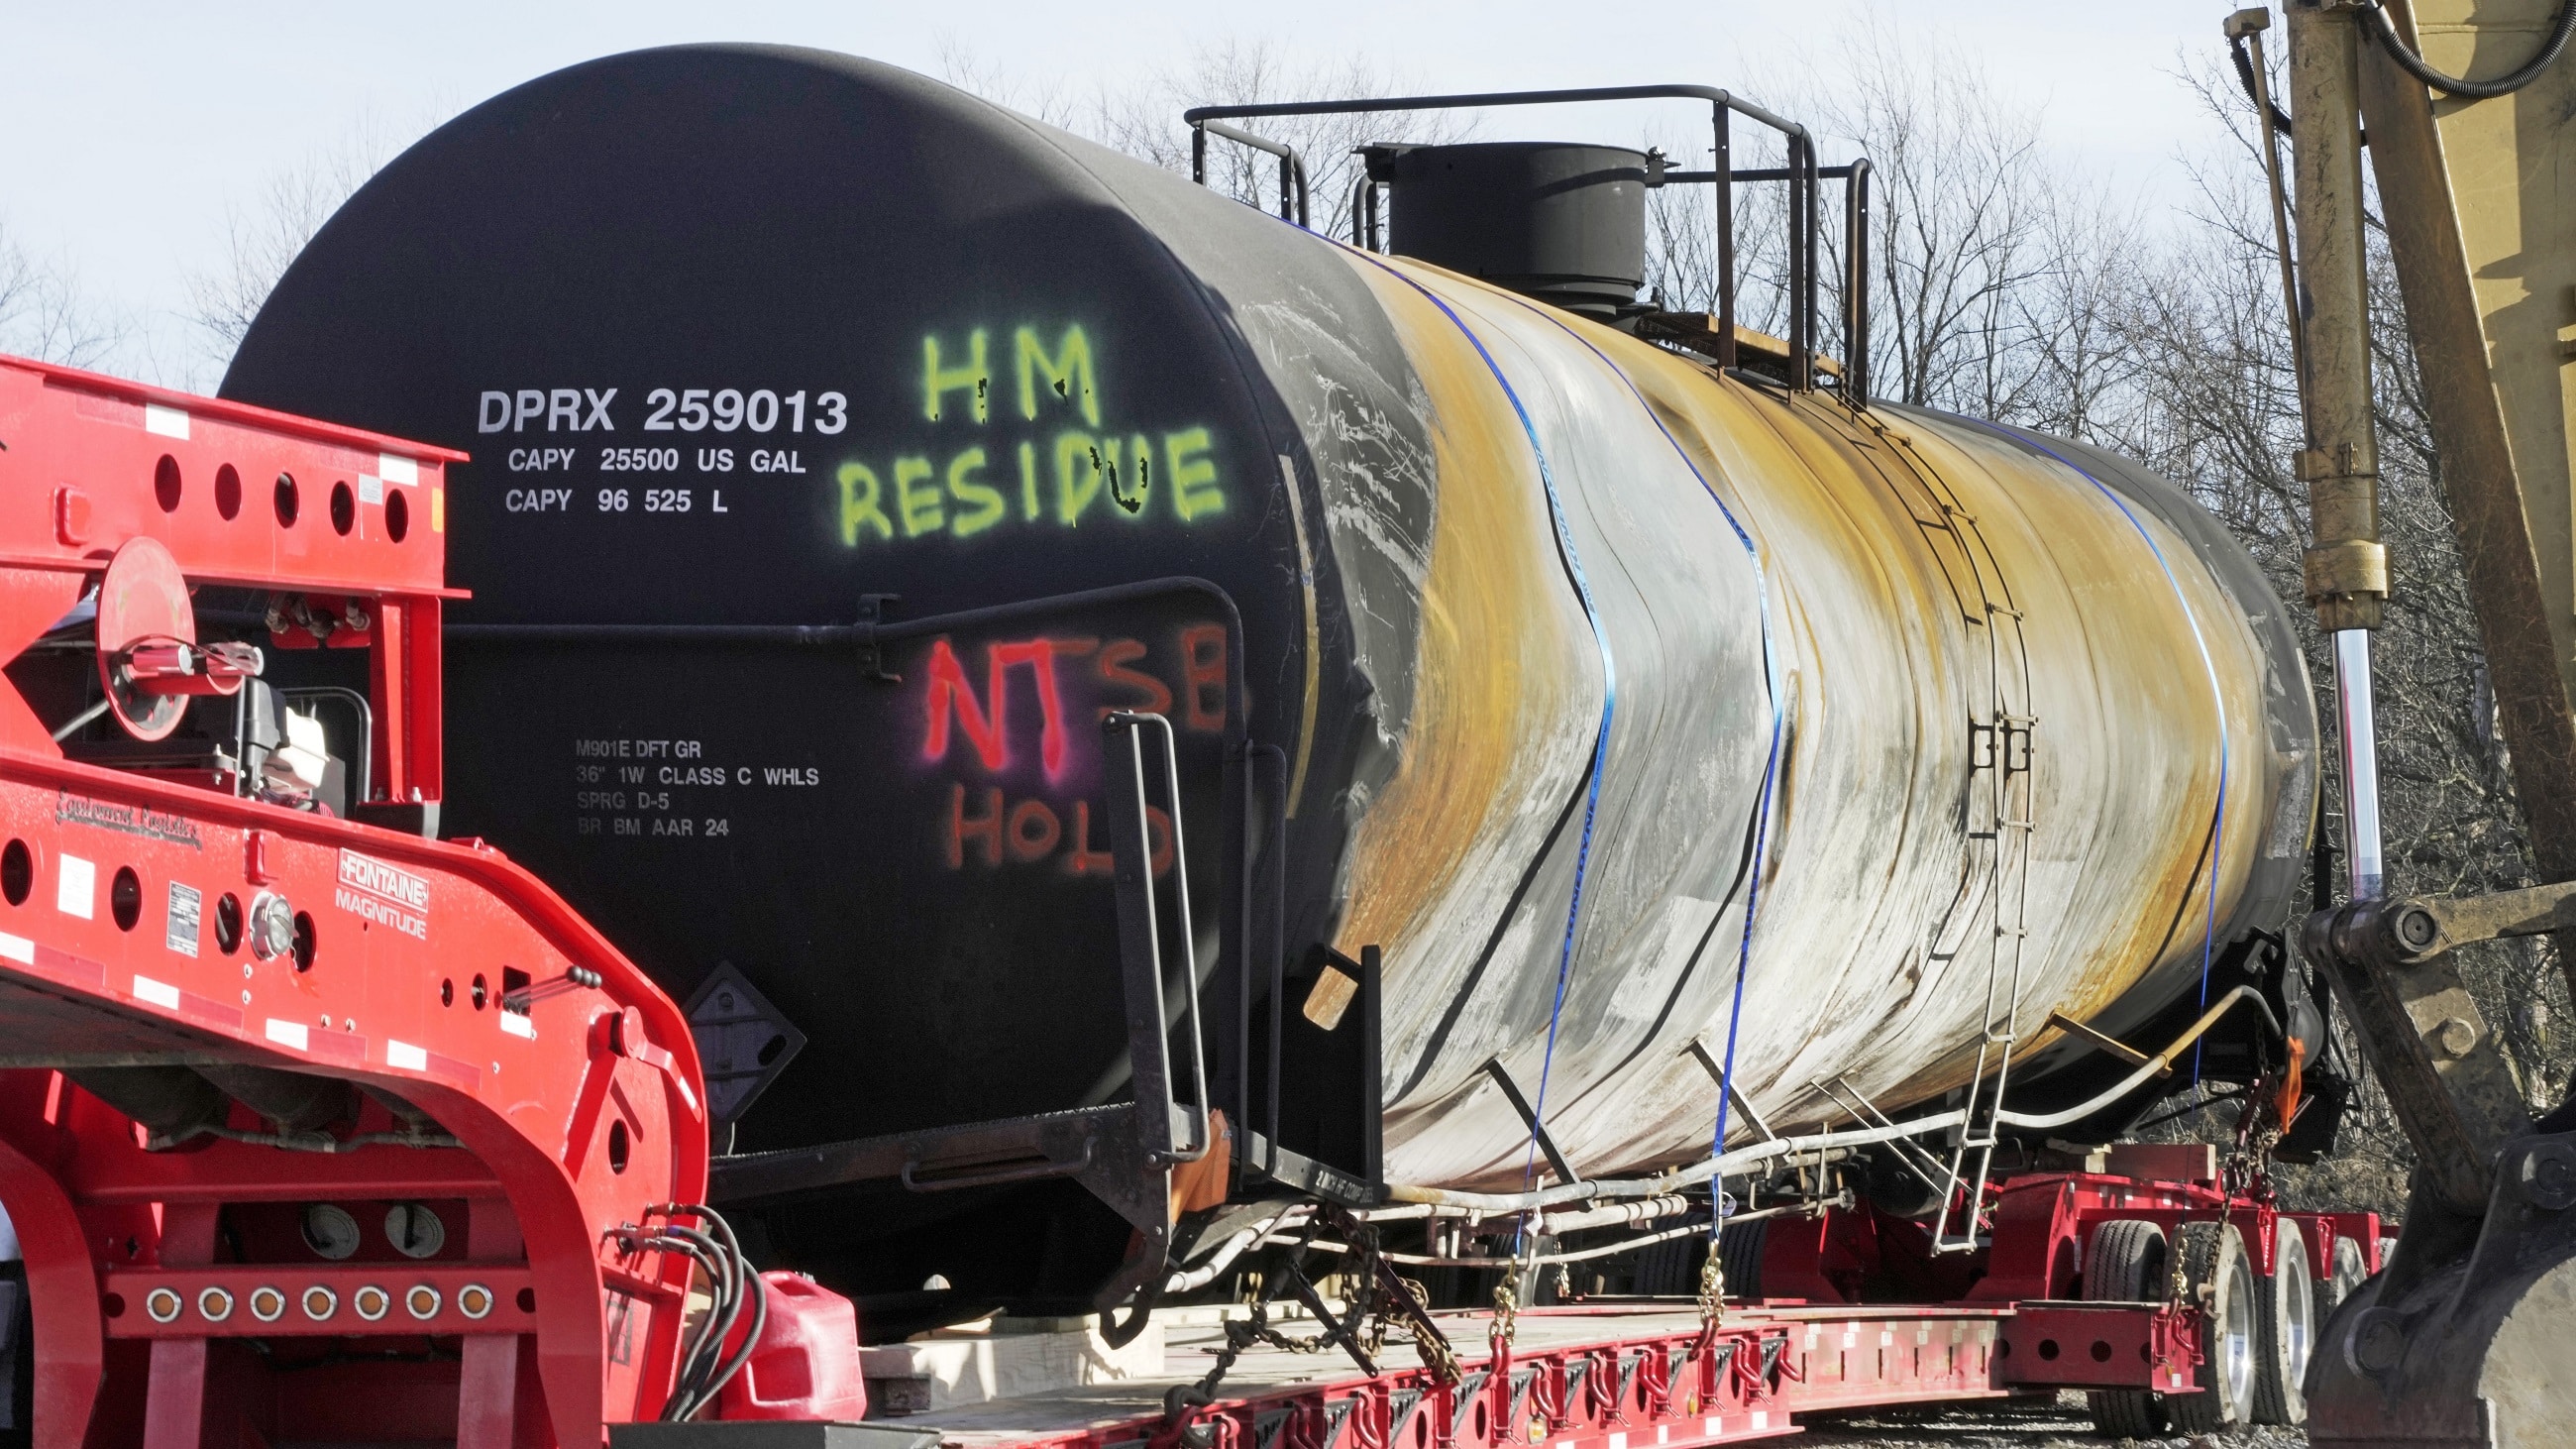 EPA chief visits Ohio town rocked by toxic train derailment